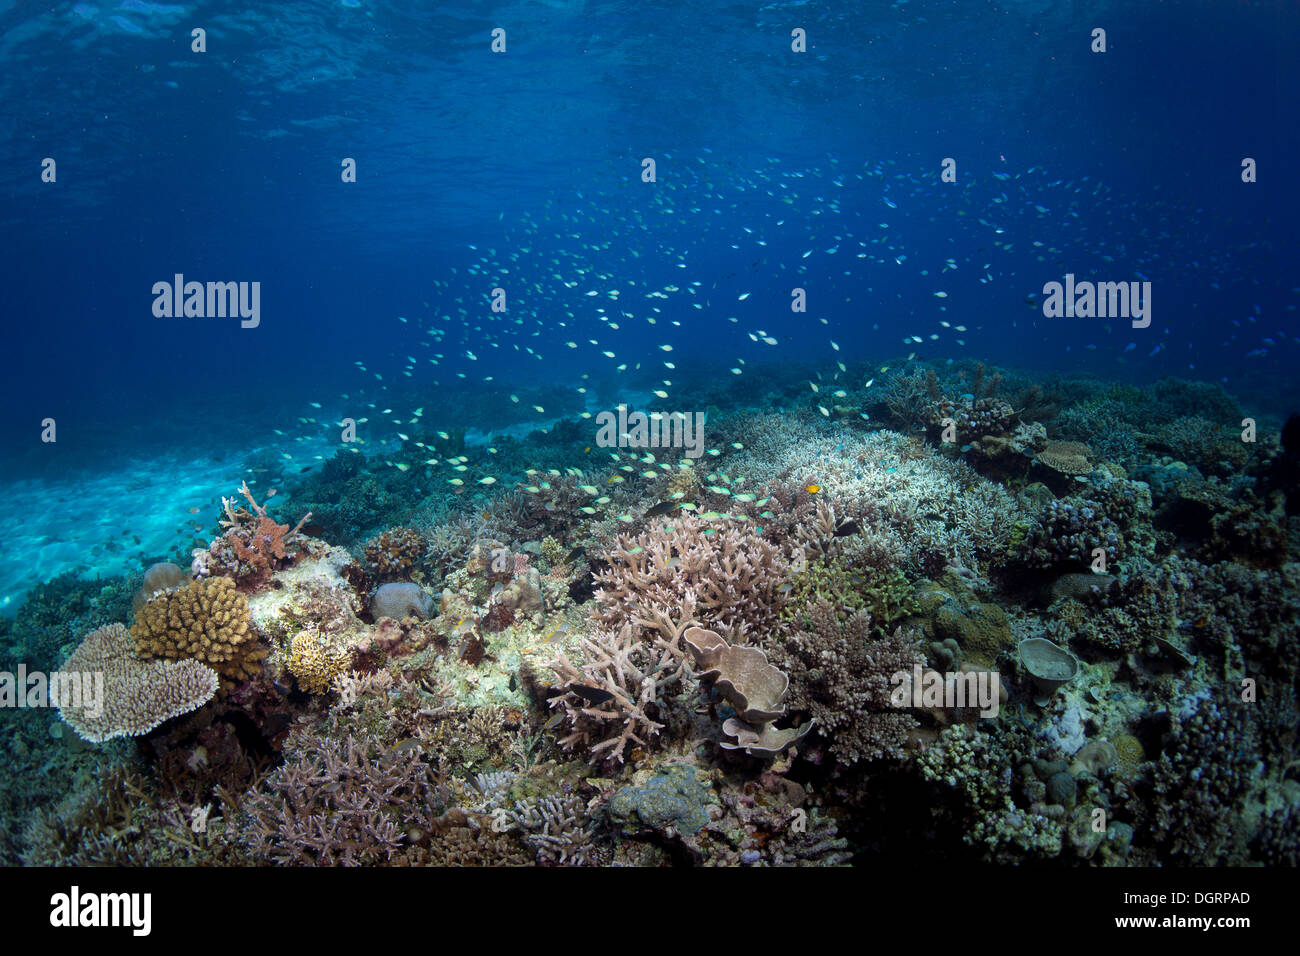 Untouched, intact coral reef with Table Coral, Elkhorn Coral or Staghorn Coral (Acropora) and Blue Green Reef Chromis (Chromis Stock Photo